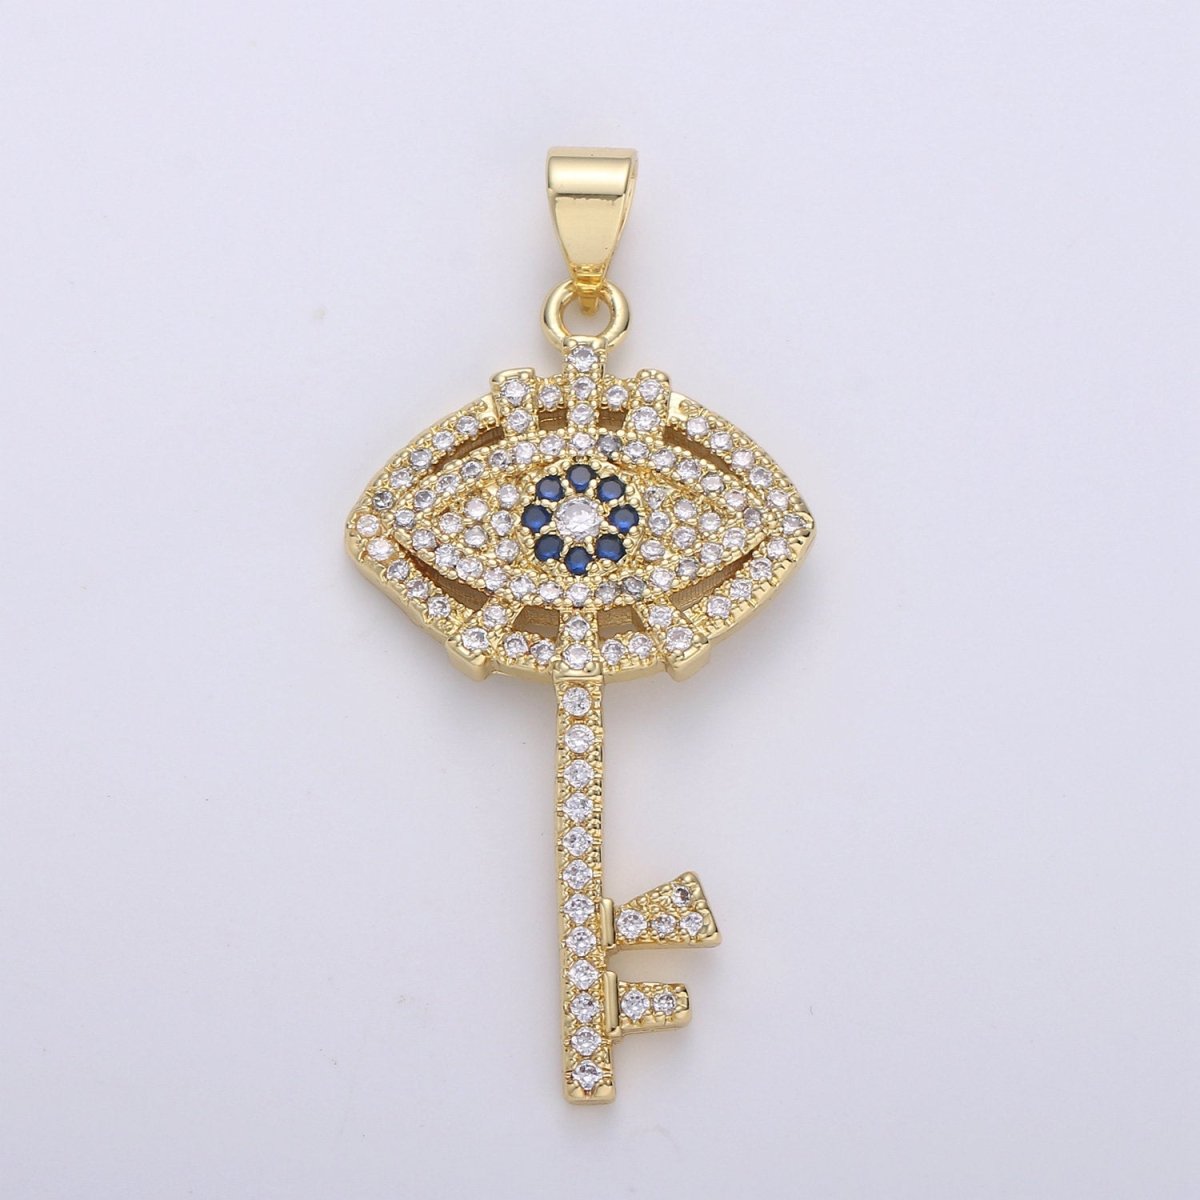 24k Gold Filled Evil Eye Pendant Micro Pave Evil Eye Charms, Gold Key Pendant Cubic Key Charm for Necklace I-876 - DLUXCA